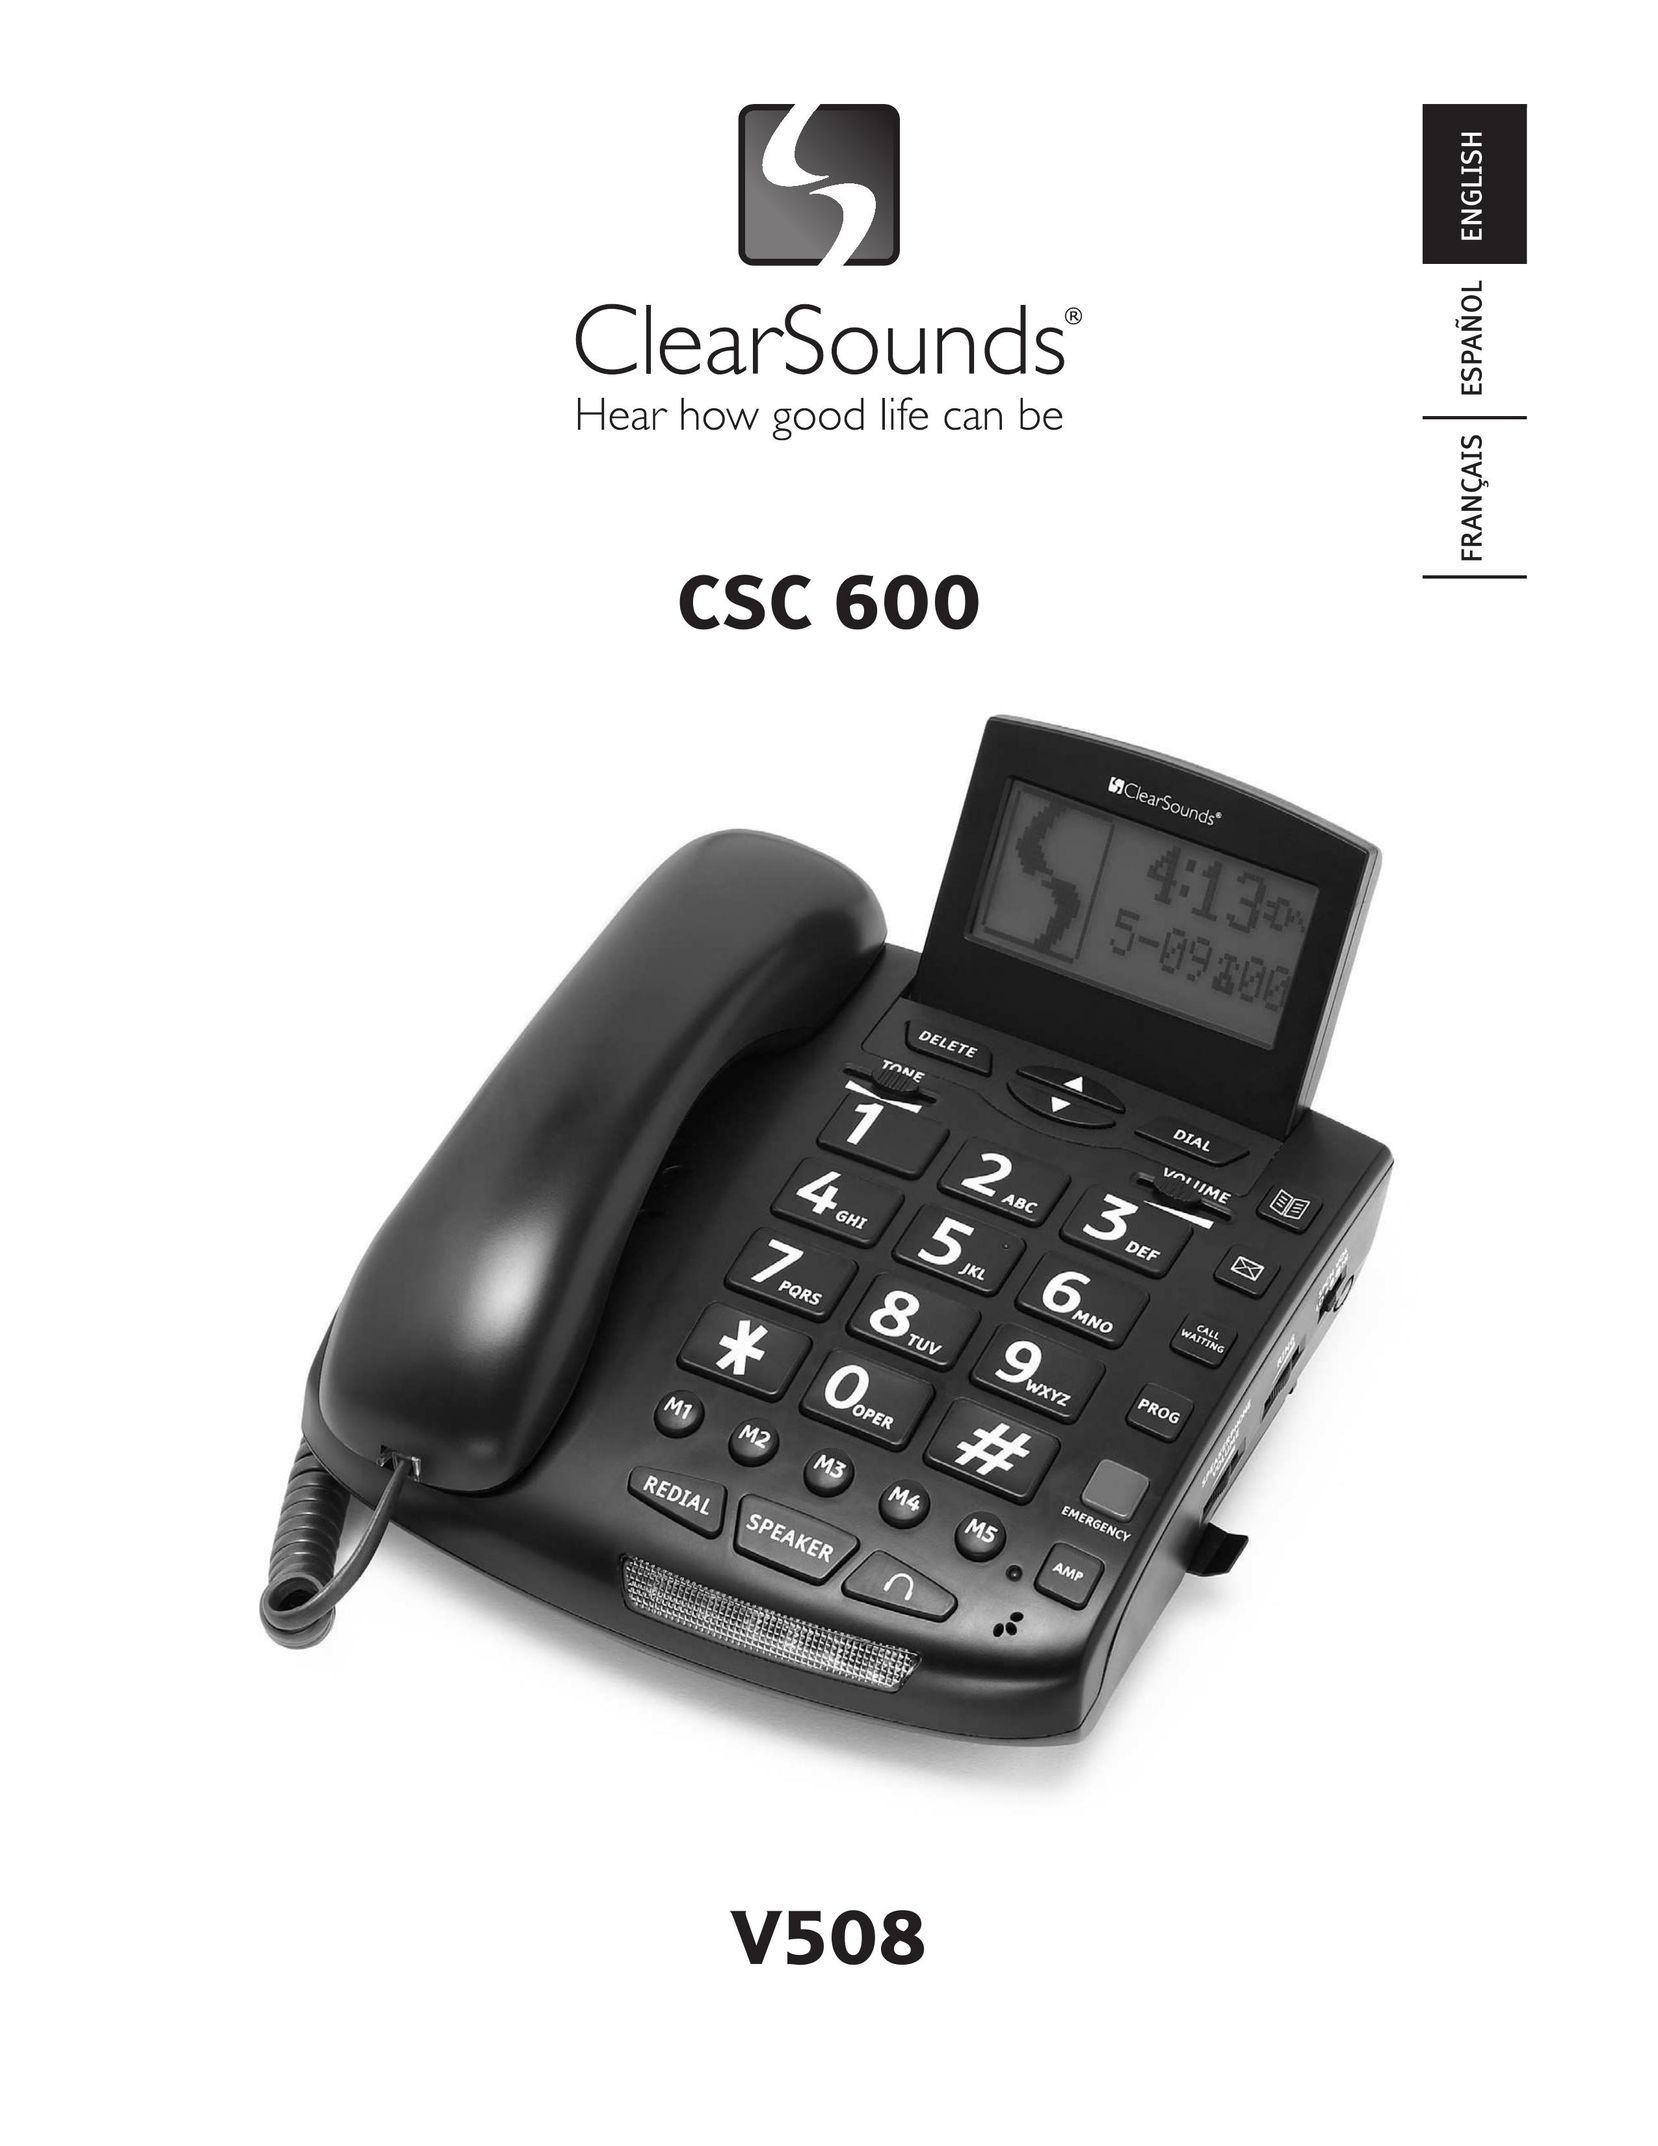 ClearSounds V508 Telephone User Manual